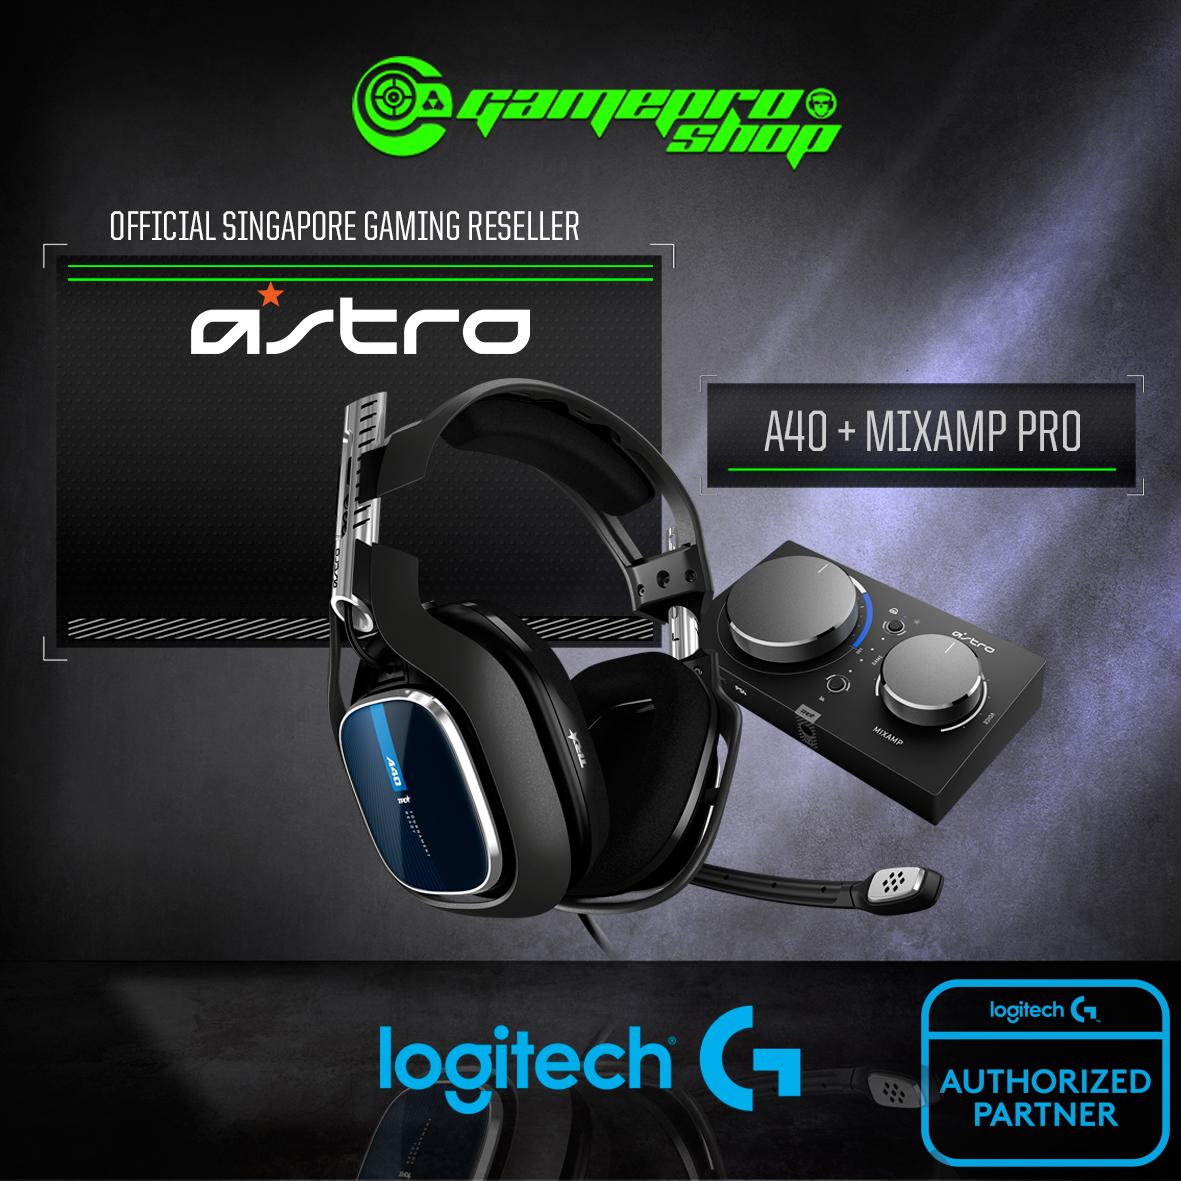 Astro 0 Tr Wired Gen 4 Black Gaming Headset Plus Mixamp Pro Tr For Ps4 Lazada Singapore